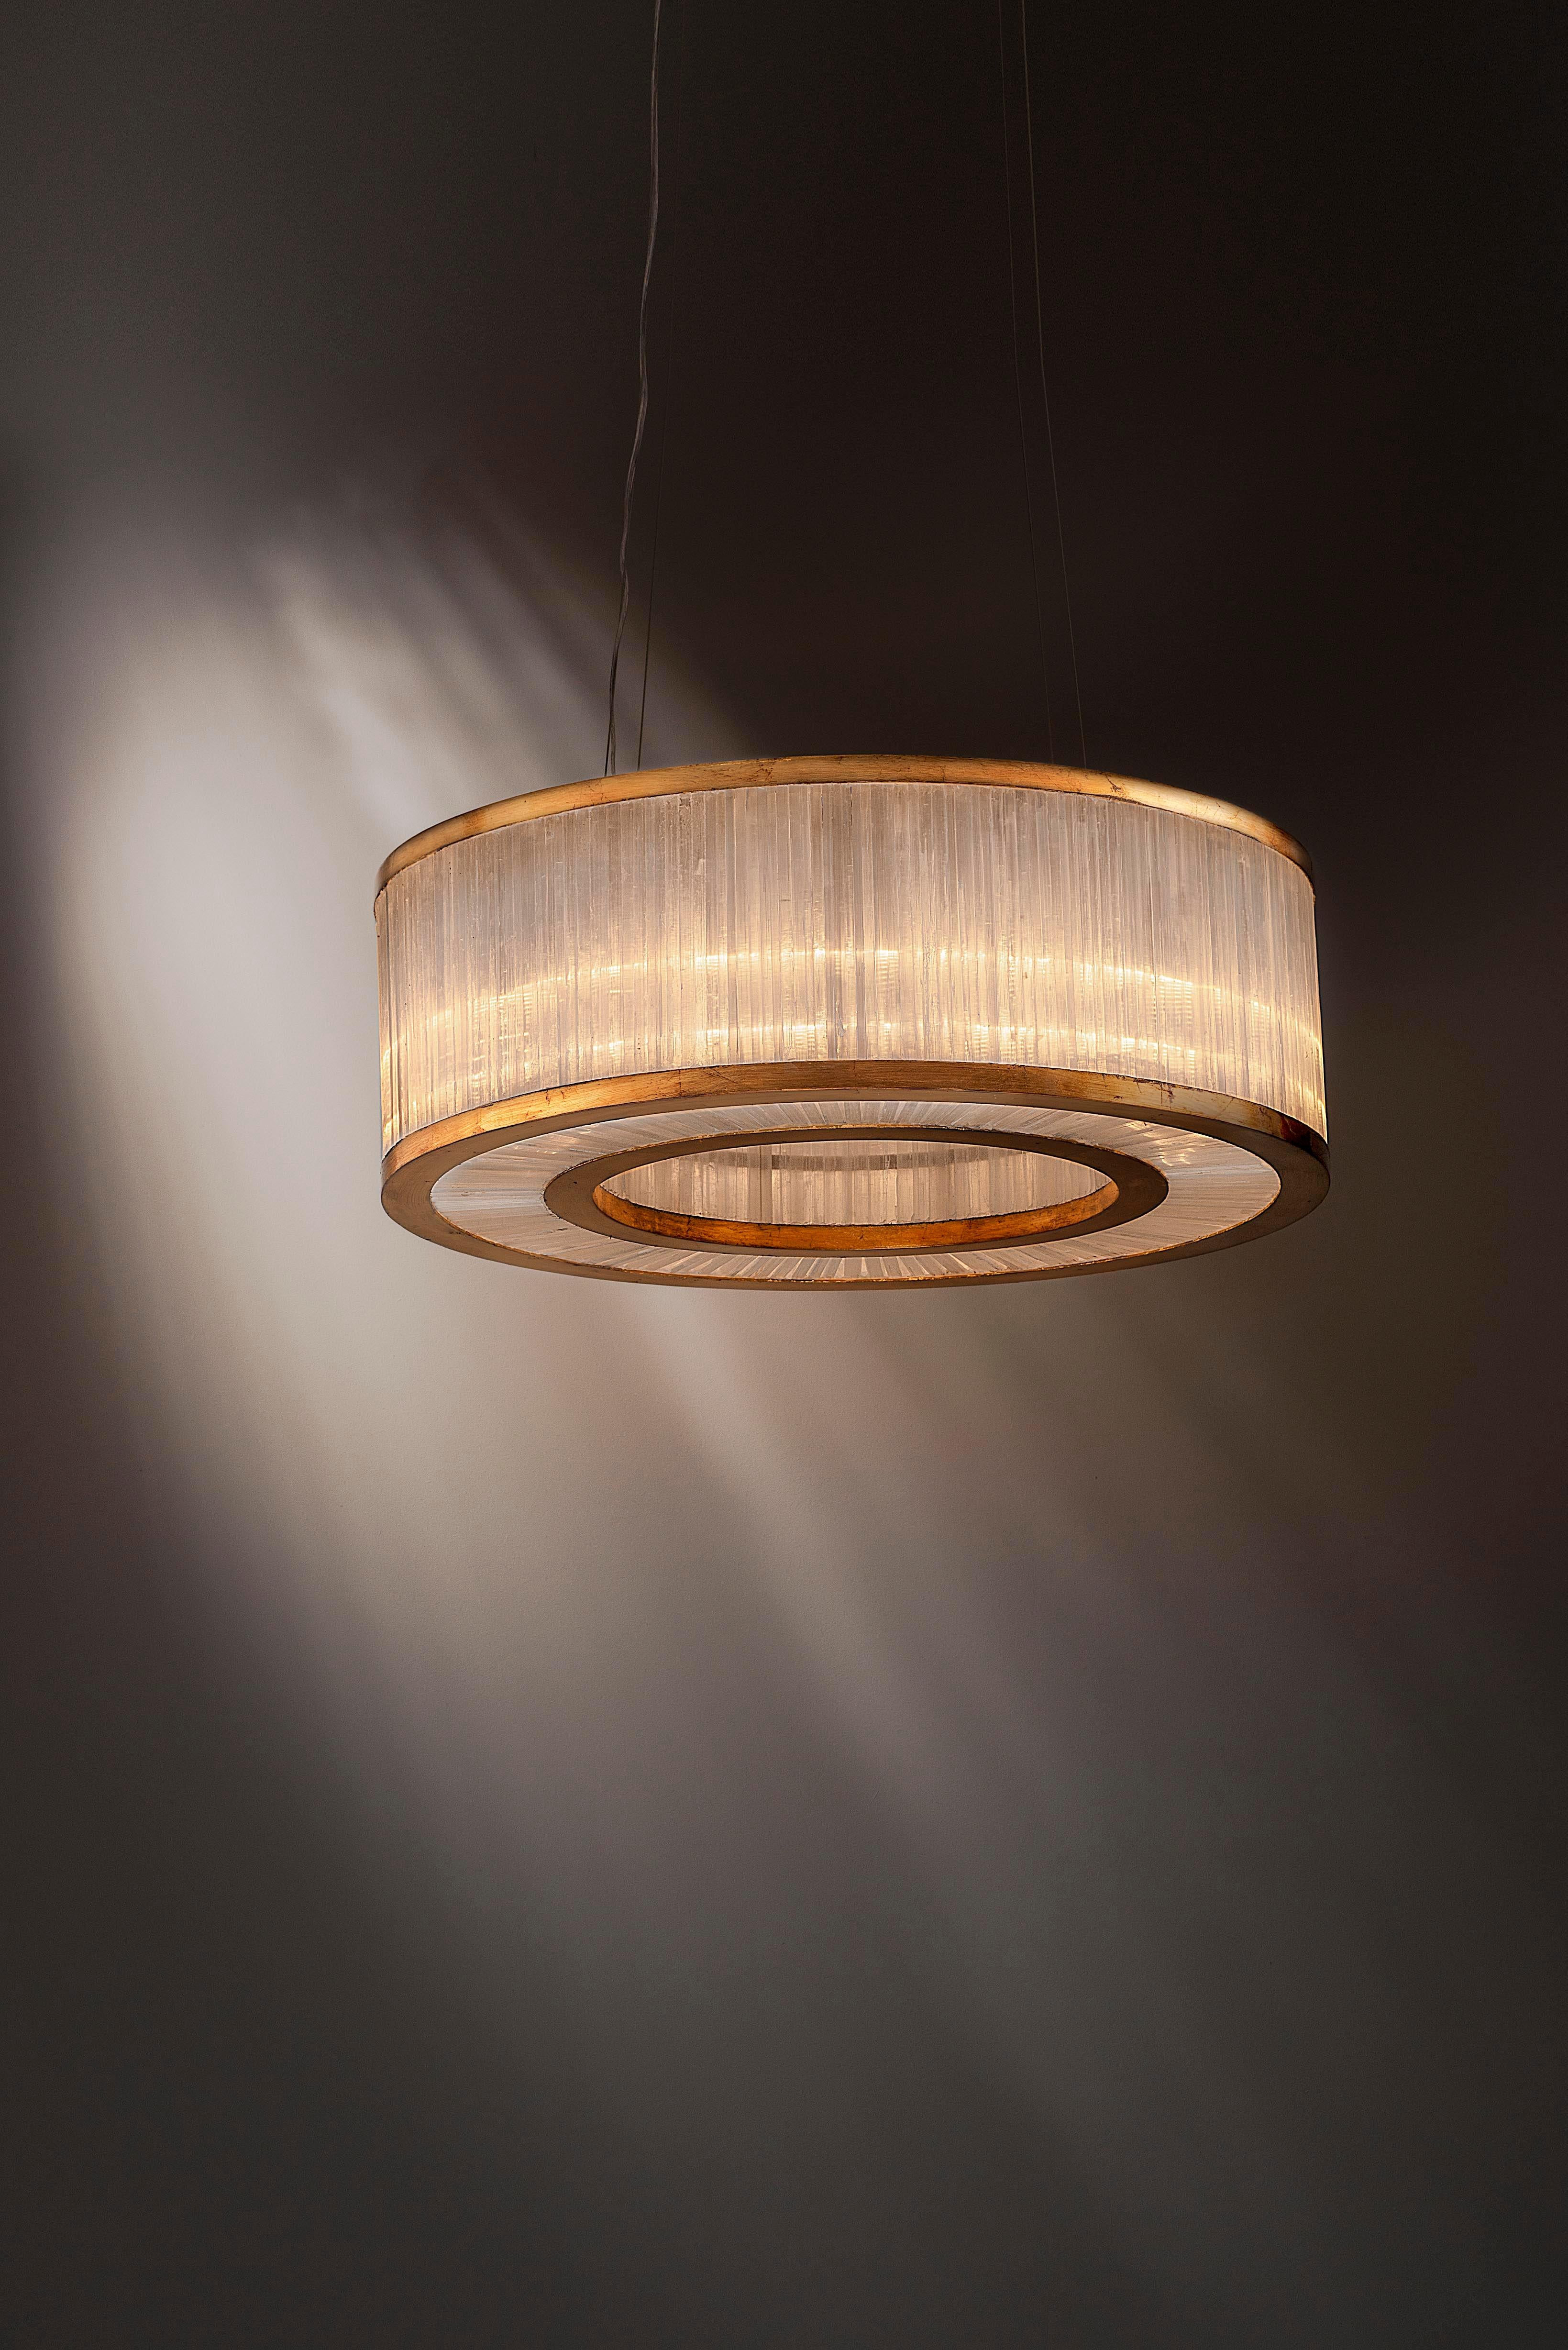 Selenite pendant lamp By Aver
Dimensions: D 76 x H 25 cm
Materials: Selenite, metal.
Also available: silver leaf, antique silver leaf, gold leaf, brass leaf, copper leaf, pink gold leaf.

Cylindrical pendant with a beautiful manual work done